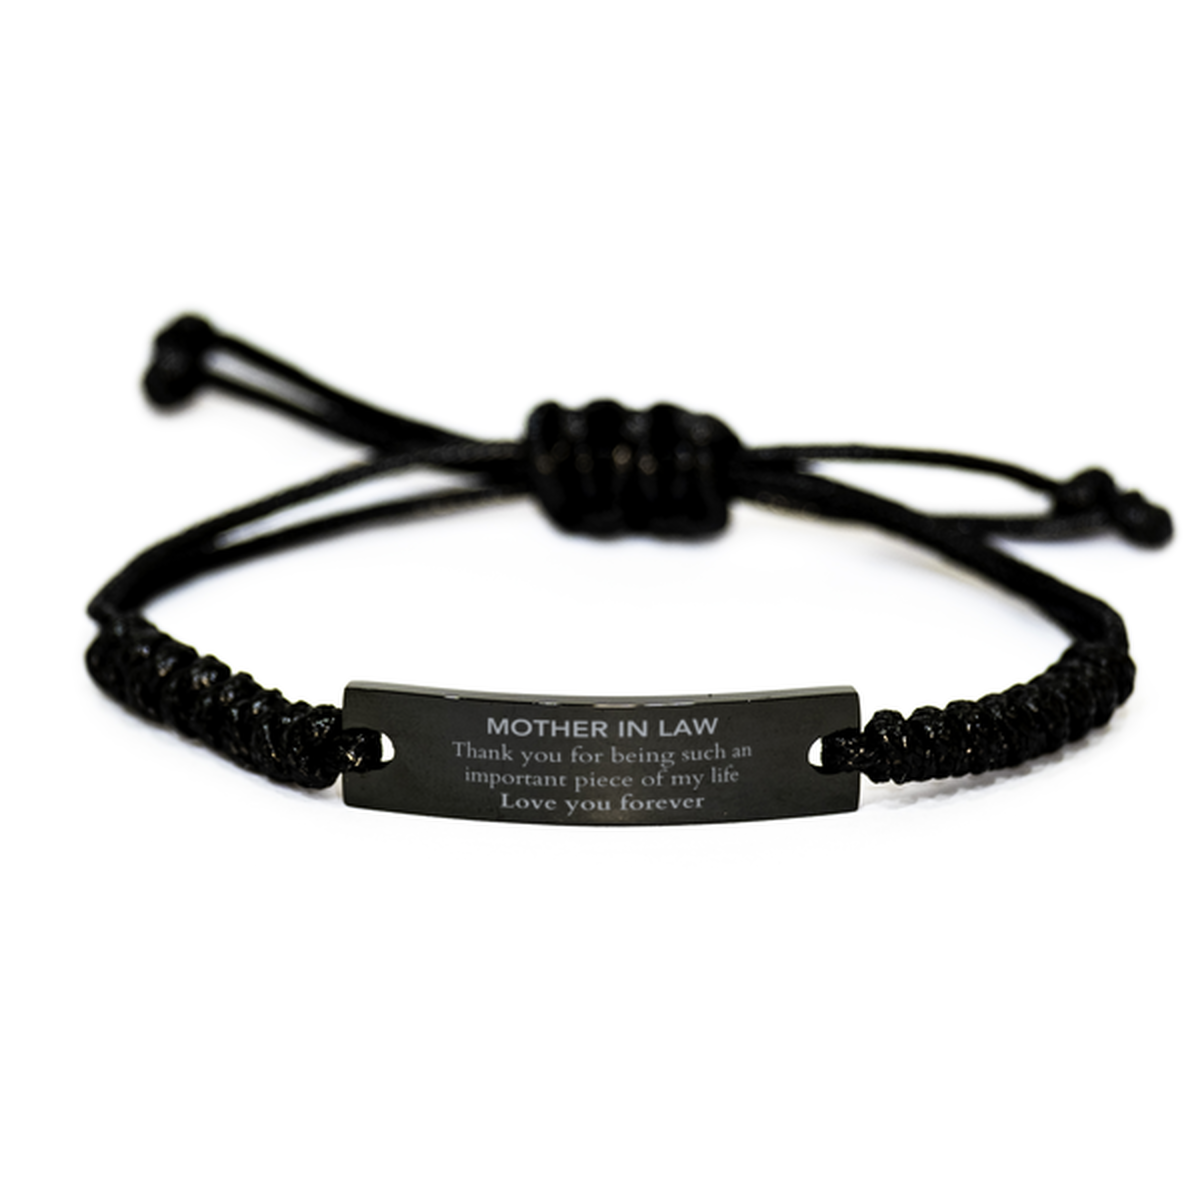 Appropriate Mother In Law Black Rope Bracelet Epic Birthday Gifts for Mother In Law Thank you for being such an important piece of my life Mother In Law Christmas Mothers Fathers Day